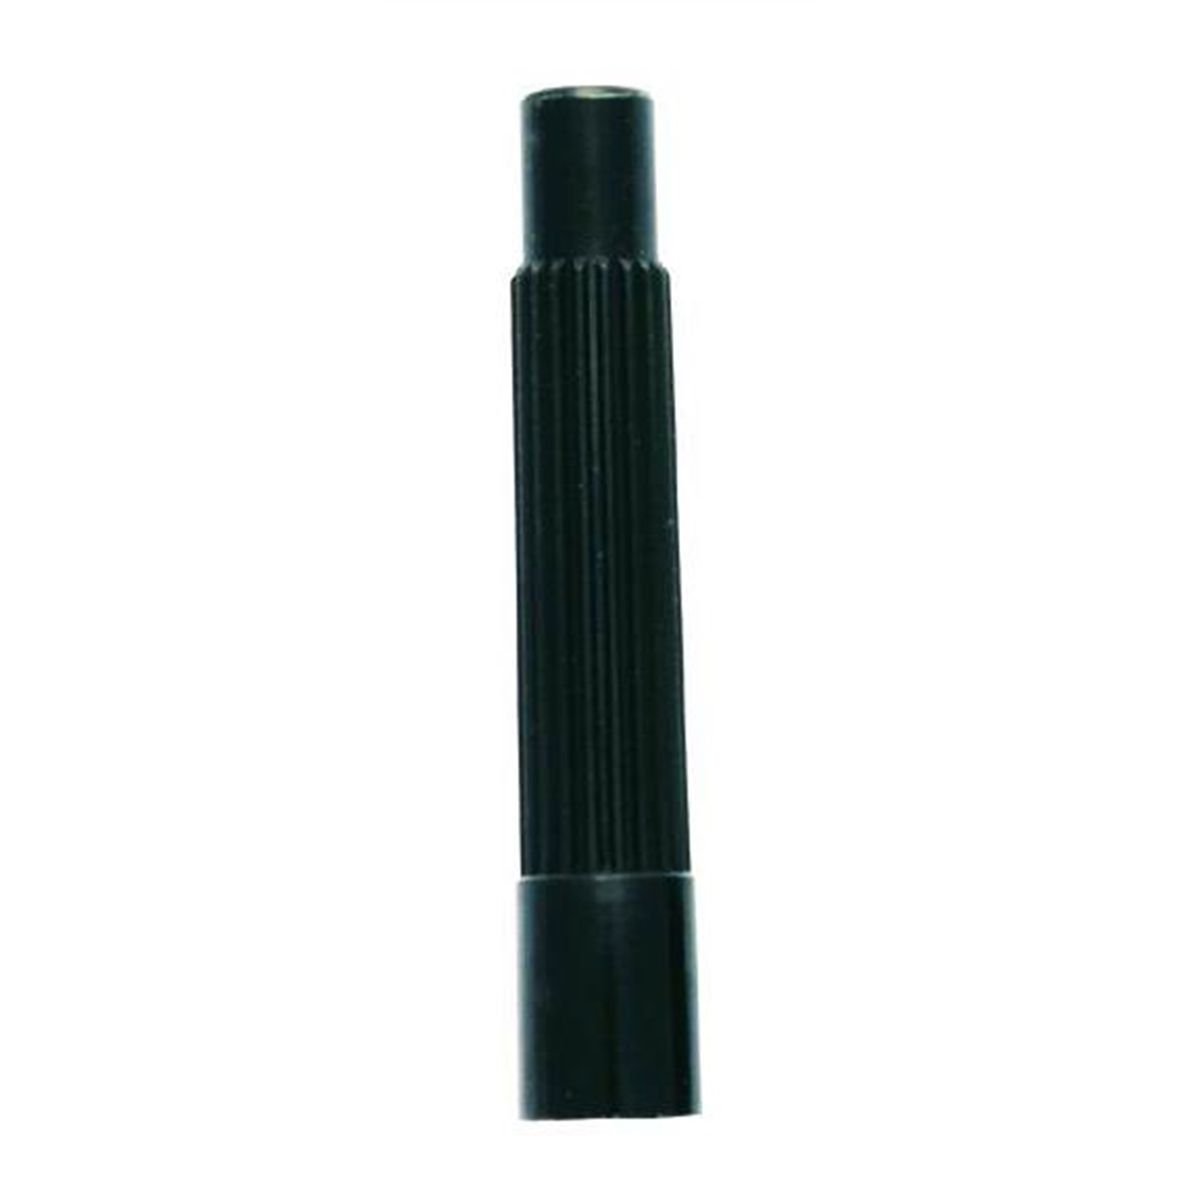 Plastic Tire Valve Extension - Effective Length 2 In